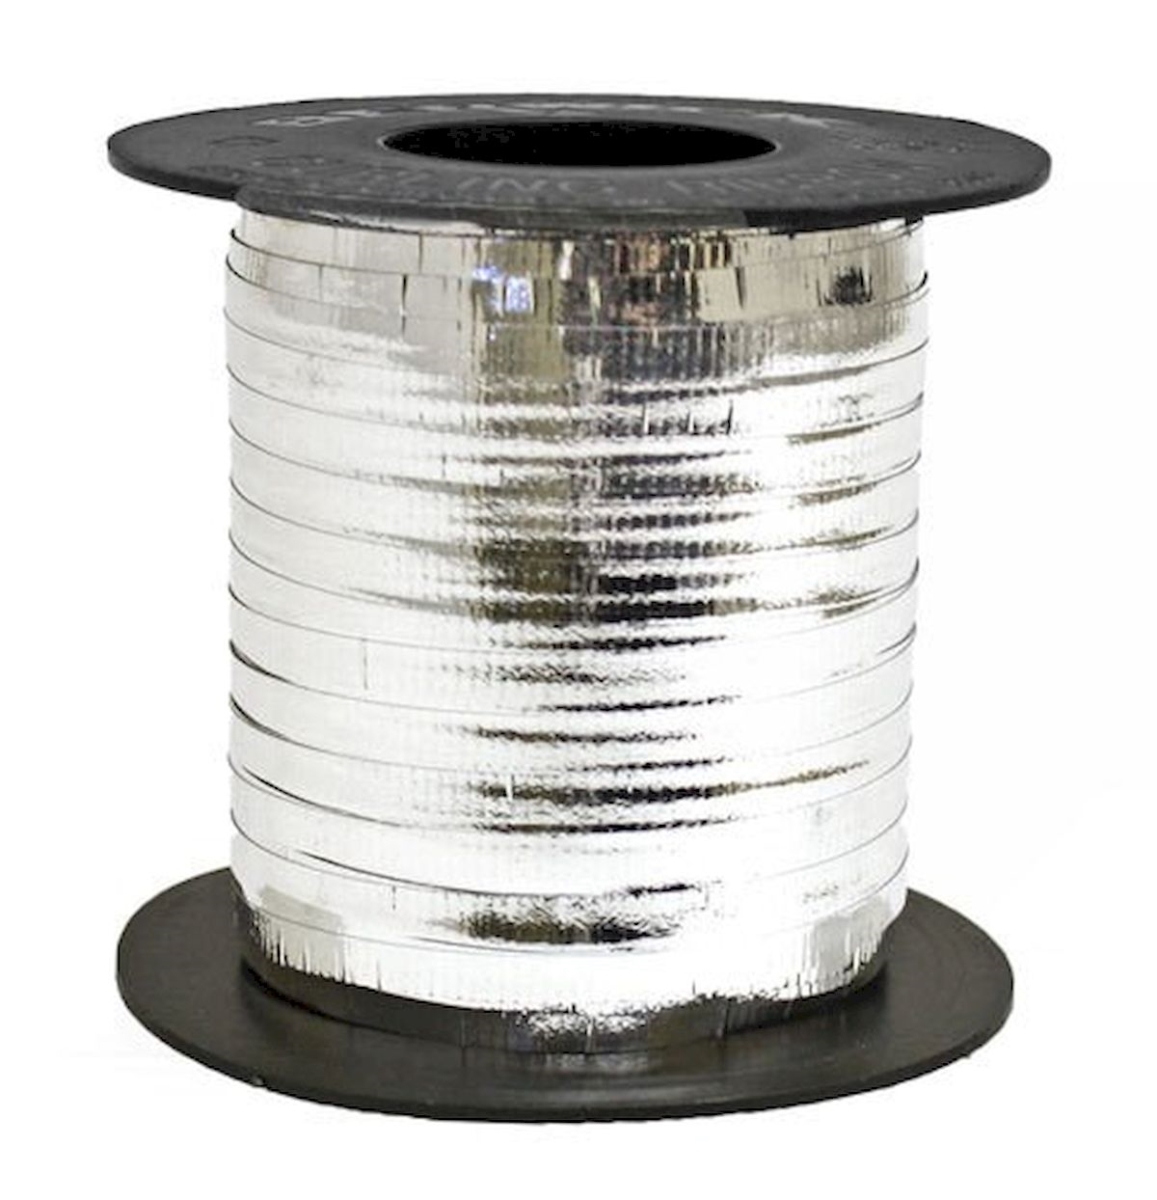 Picture of Mr. MJs Trading AI-5111 0.19 in. x 250 Yards Metallic Silver Curl Crimped Ribbon